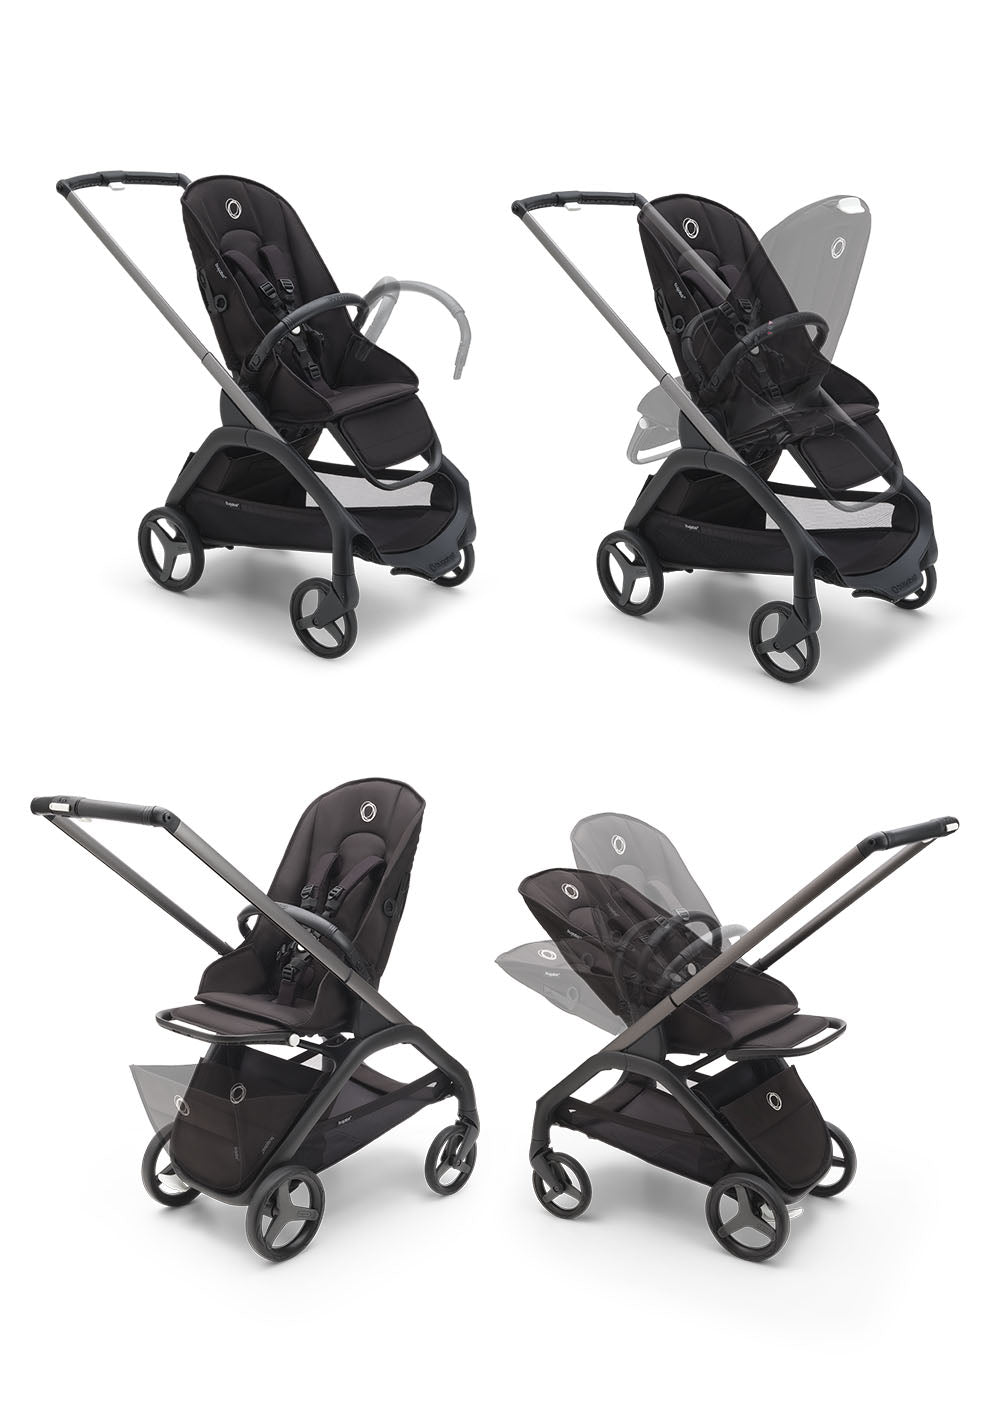 Bugaboo Dragonfly Kinderwagen 'Styled by you' Schwarz / Grau MeliertBugaboo Dragonfly Kinderwagen 'Styled by you' Schwarz / Grau Meliert